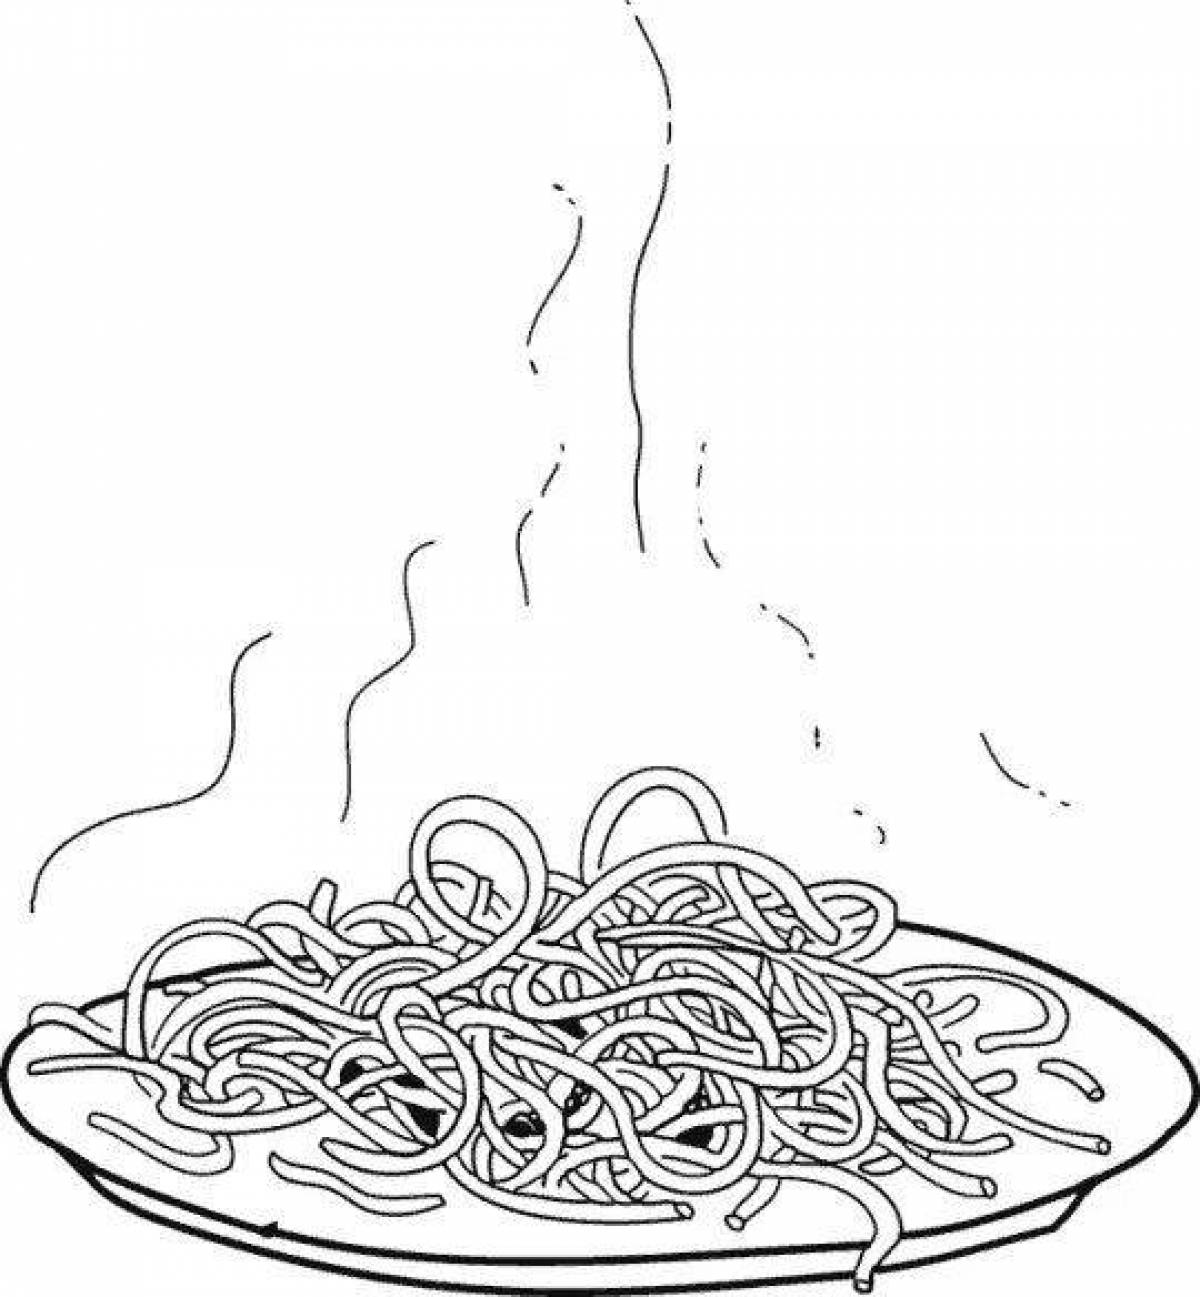 Colorful playful spaghetti coloring page